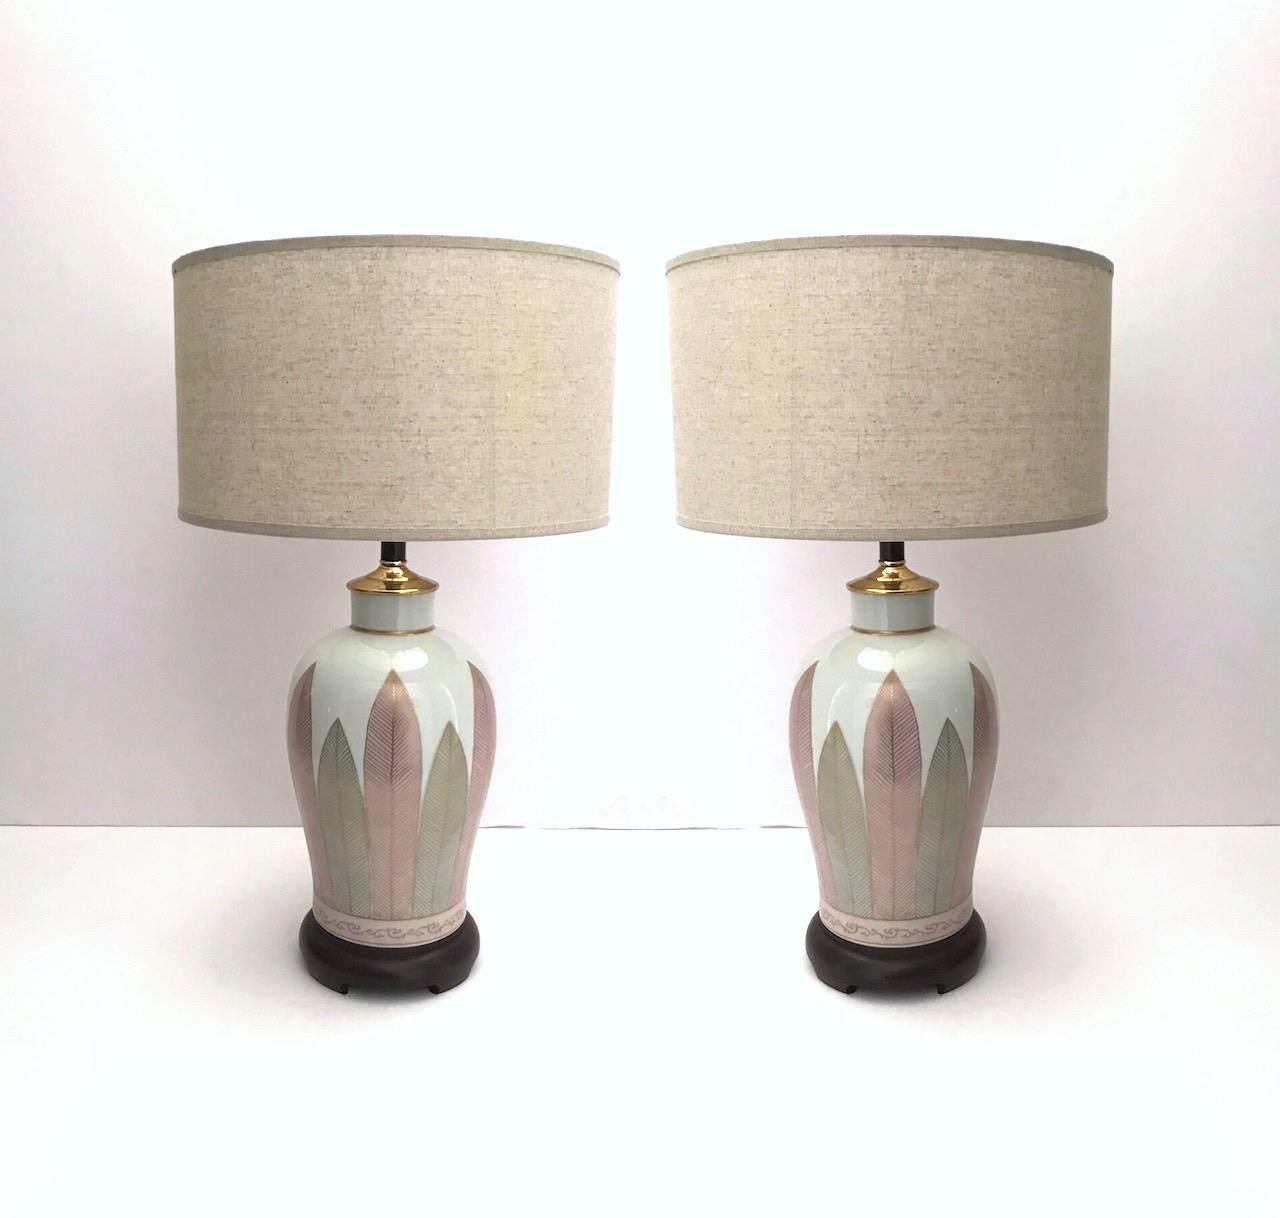 Pair of Mid-Century Modern Japanese porcelain lamps with white crackle glaze finish. Lamps have elegant urn forms with hand painted leaves in alternating hues of pink and grey, and outlined in 22-karat gold leaf. The hand-applied gold is used again